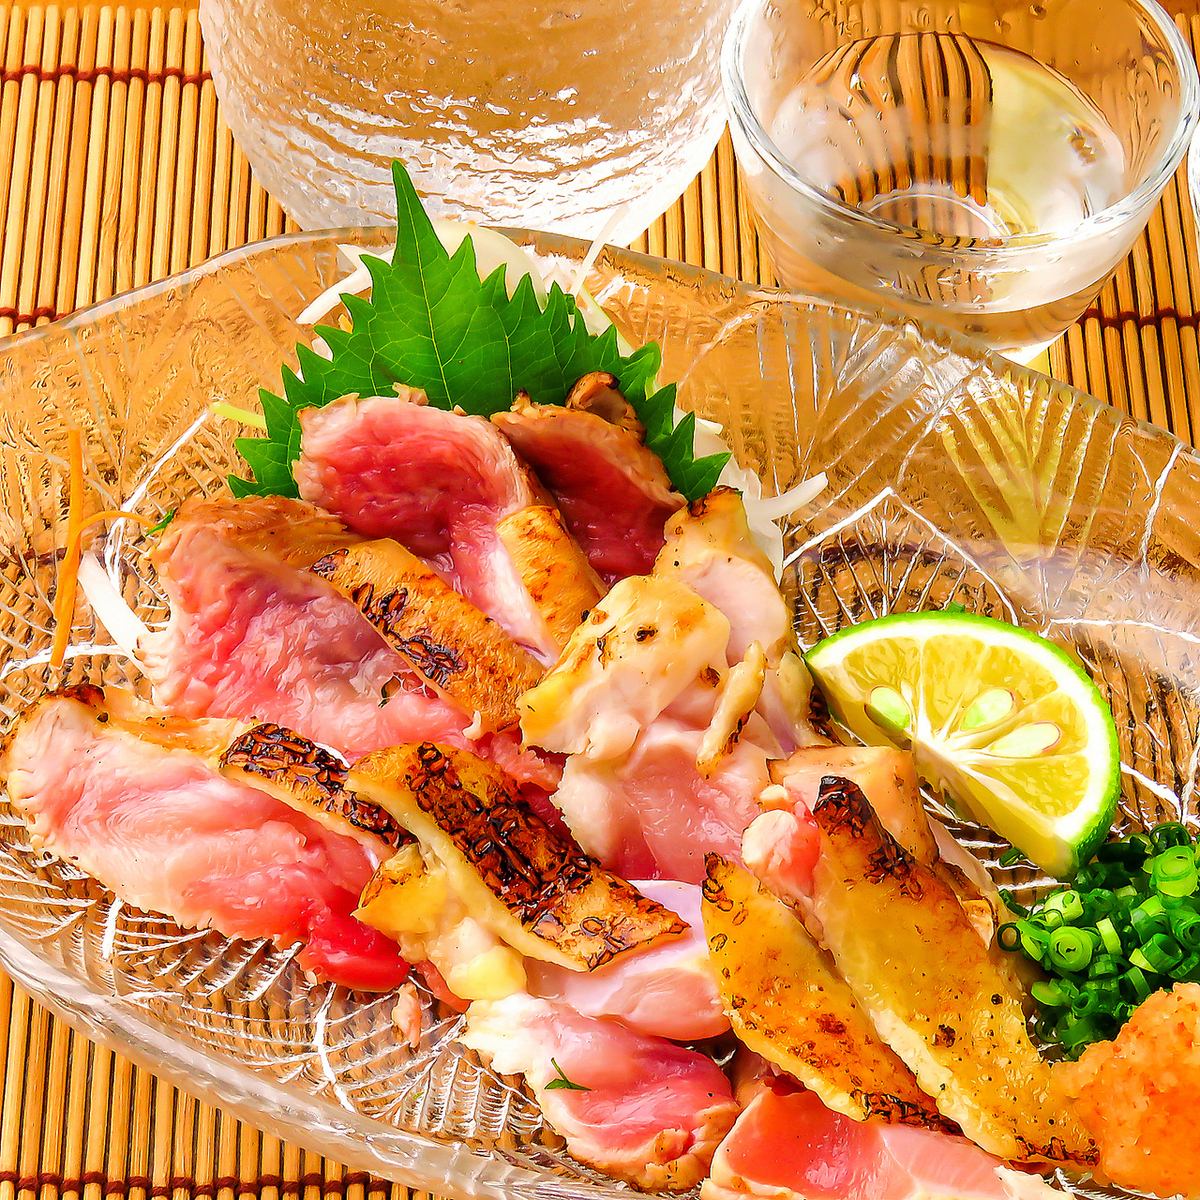 The specialty "local chicken tataki" and "charcoal grilled yakitori" are outstanding in both meat quality and flavor.